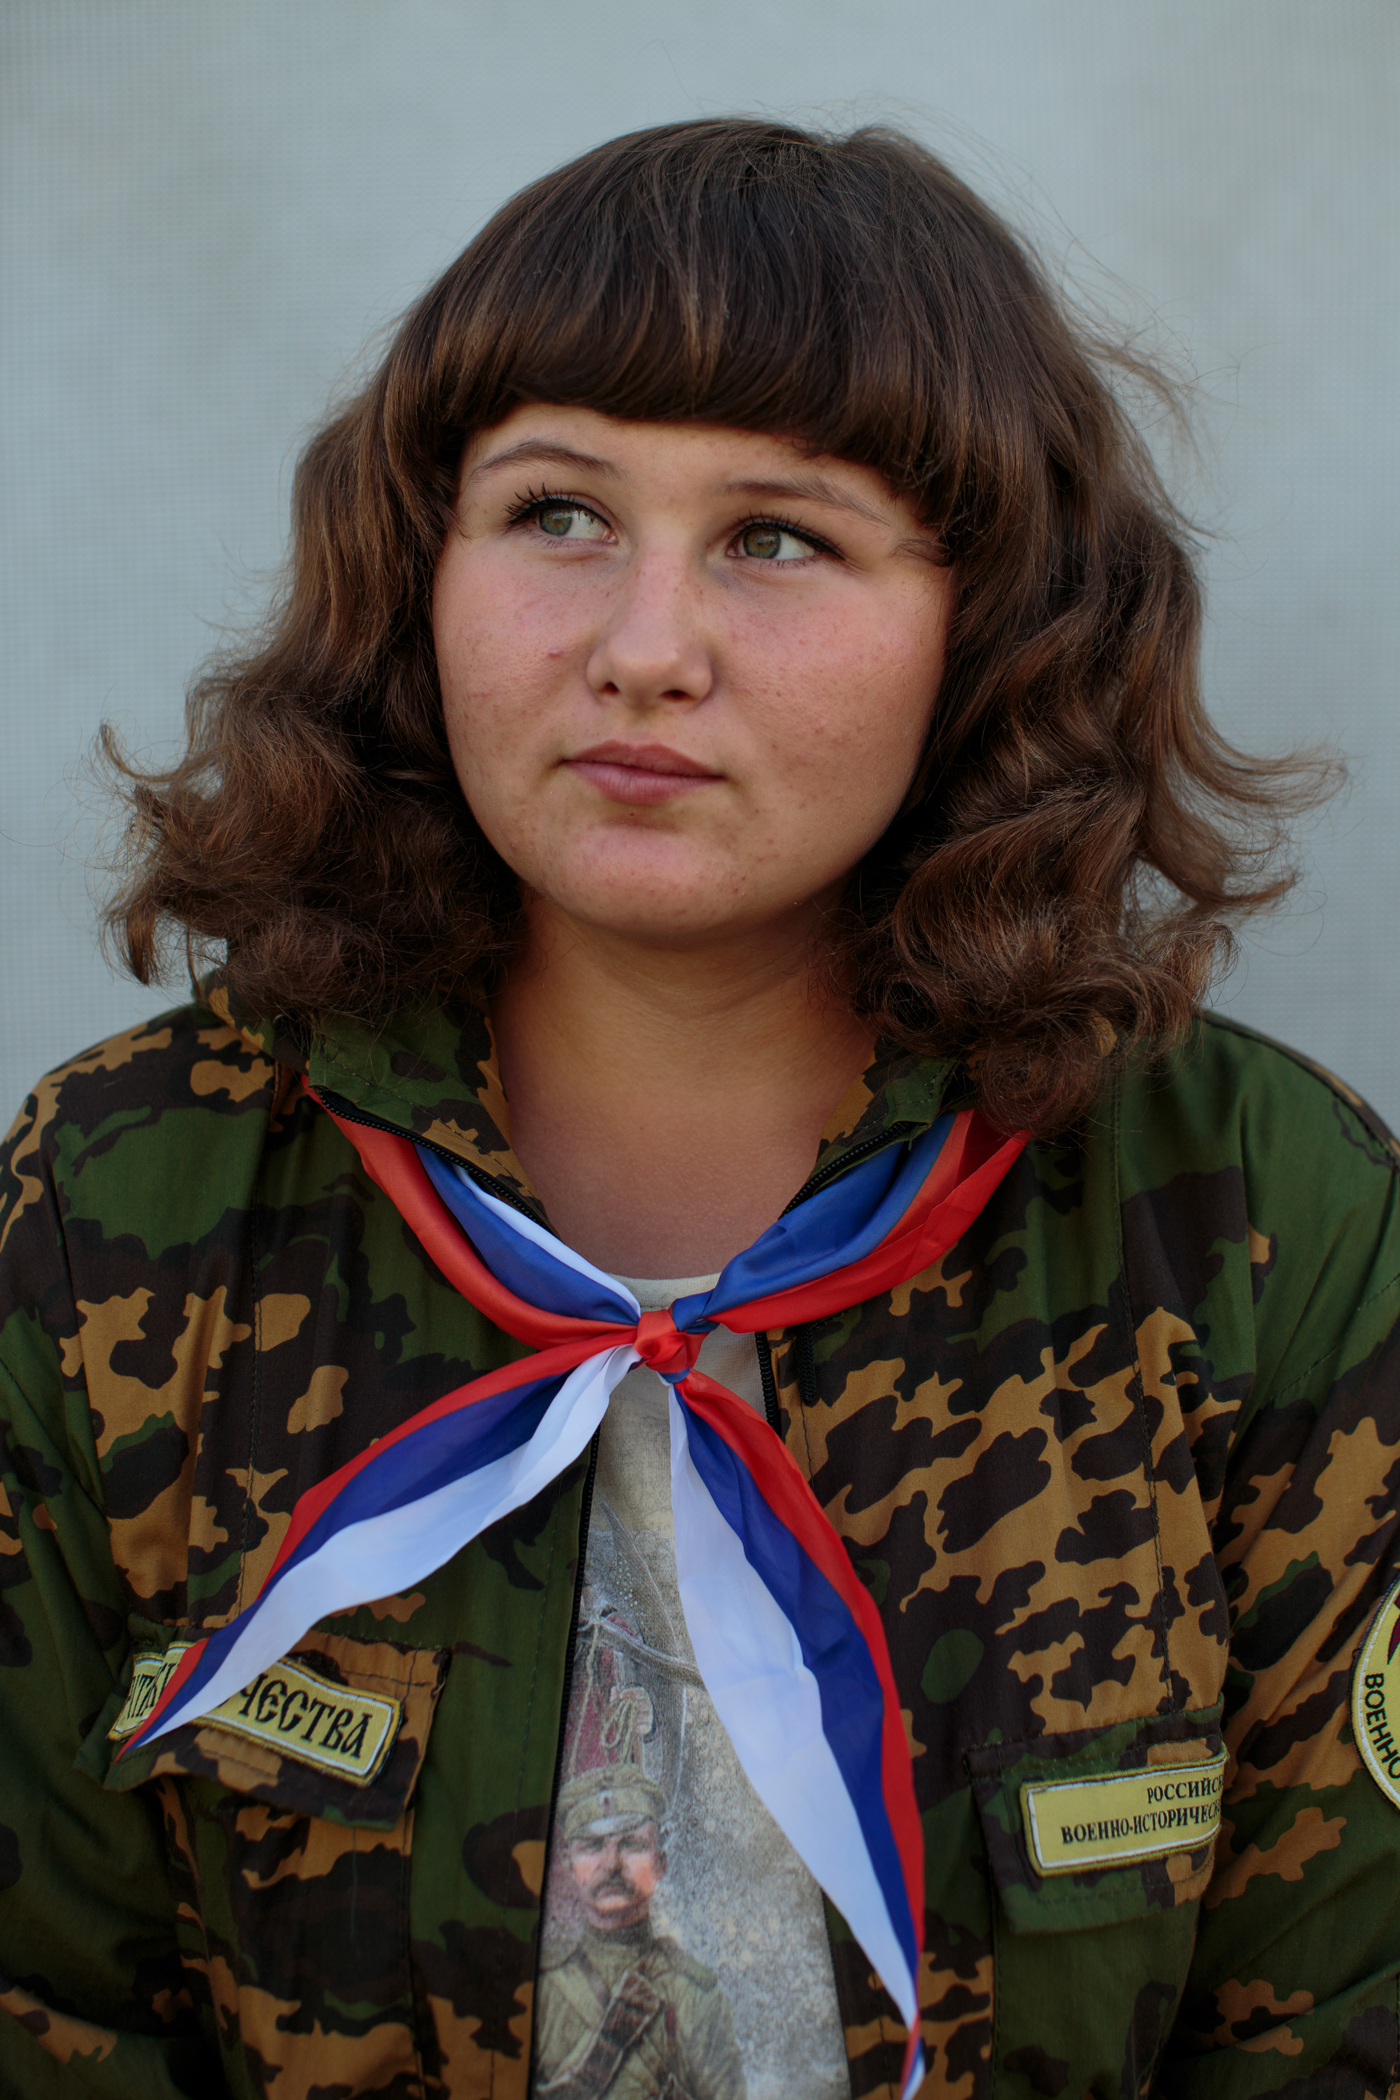 Vika Meshkova, age 14, from Radyukino. Russia, poses for a portrait. The camp is free for all kids to attend.